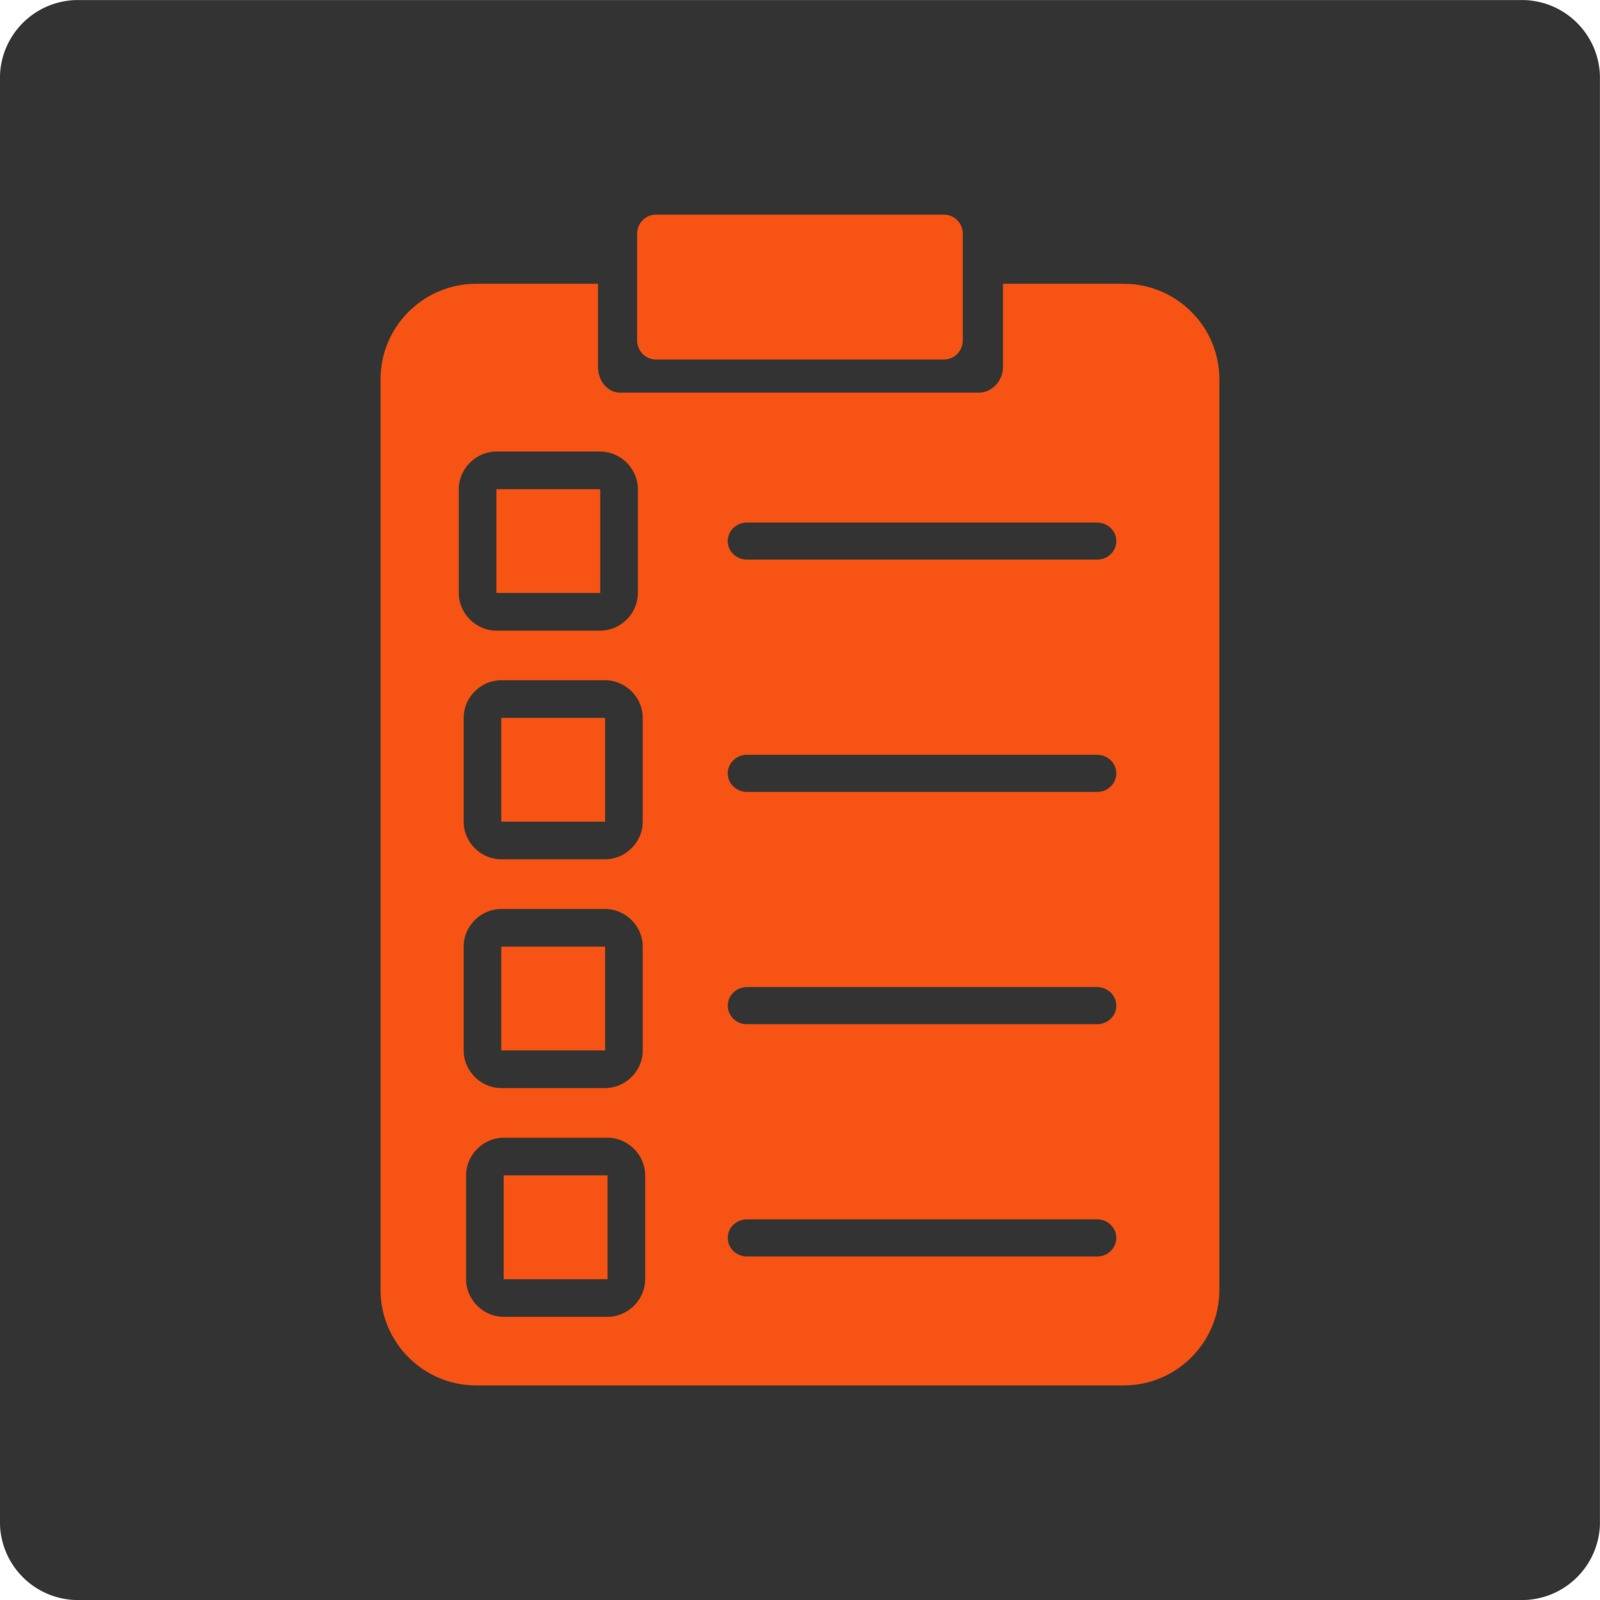 Test task icon. Vector style is orange and gray colors, flat rounded square button on a white background.